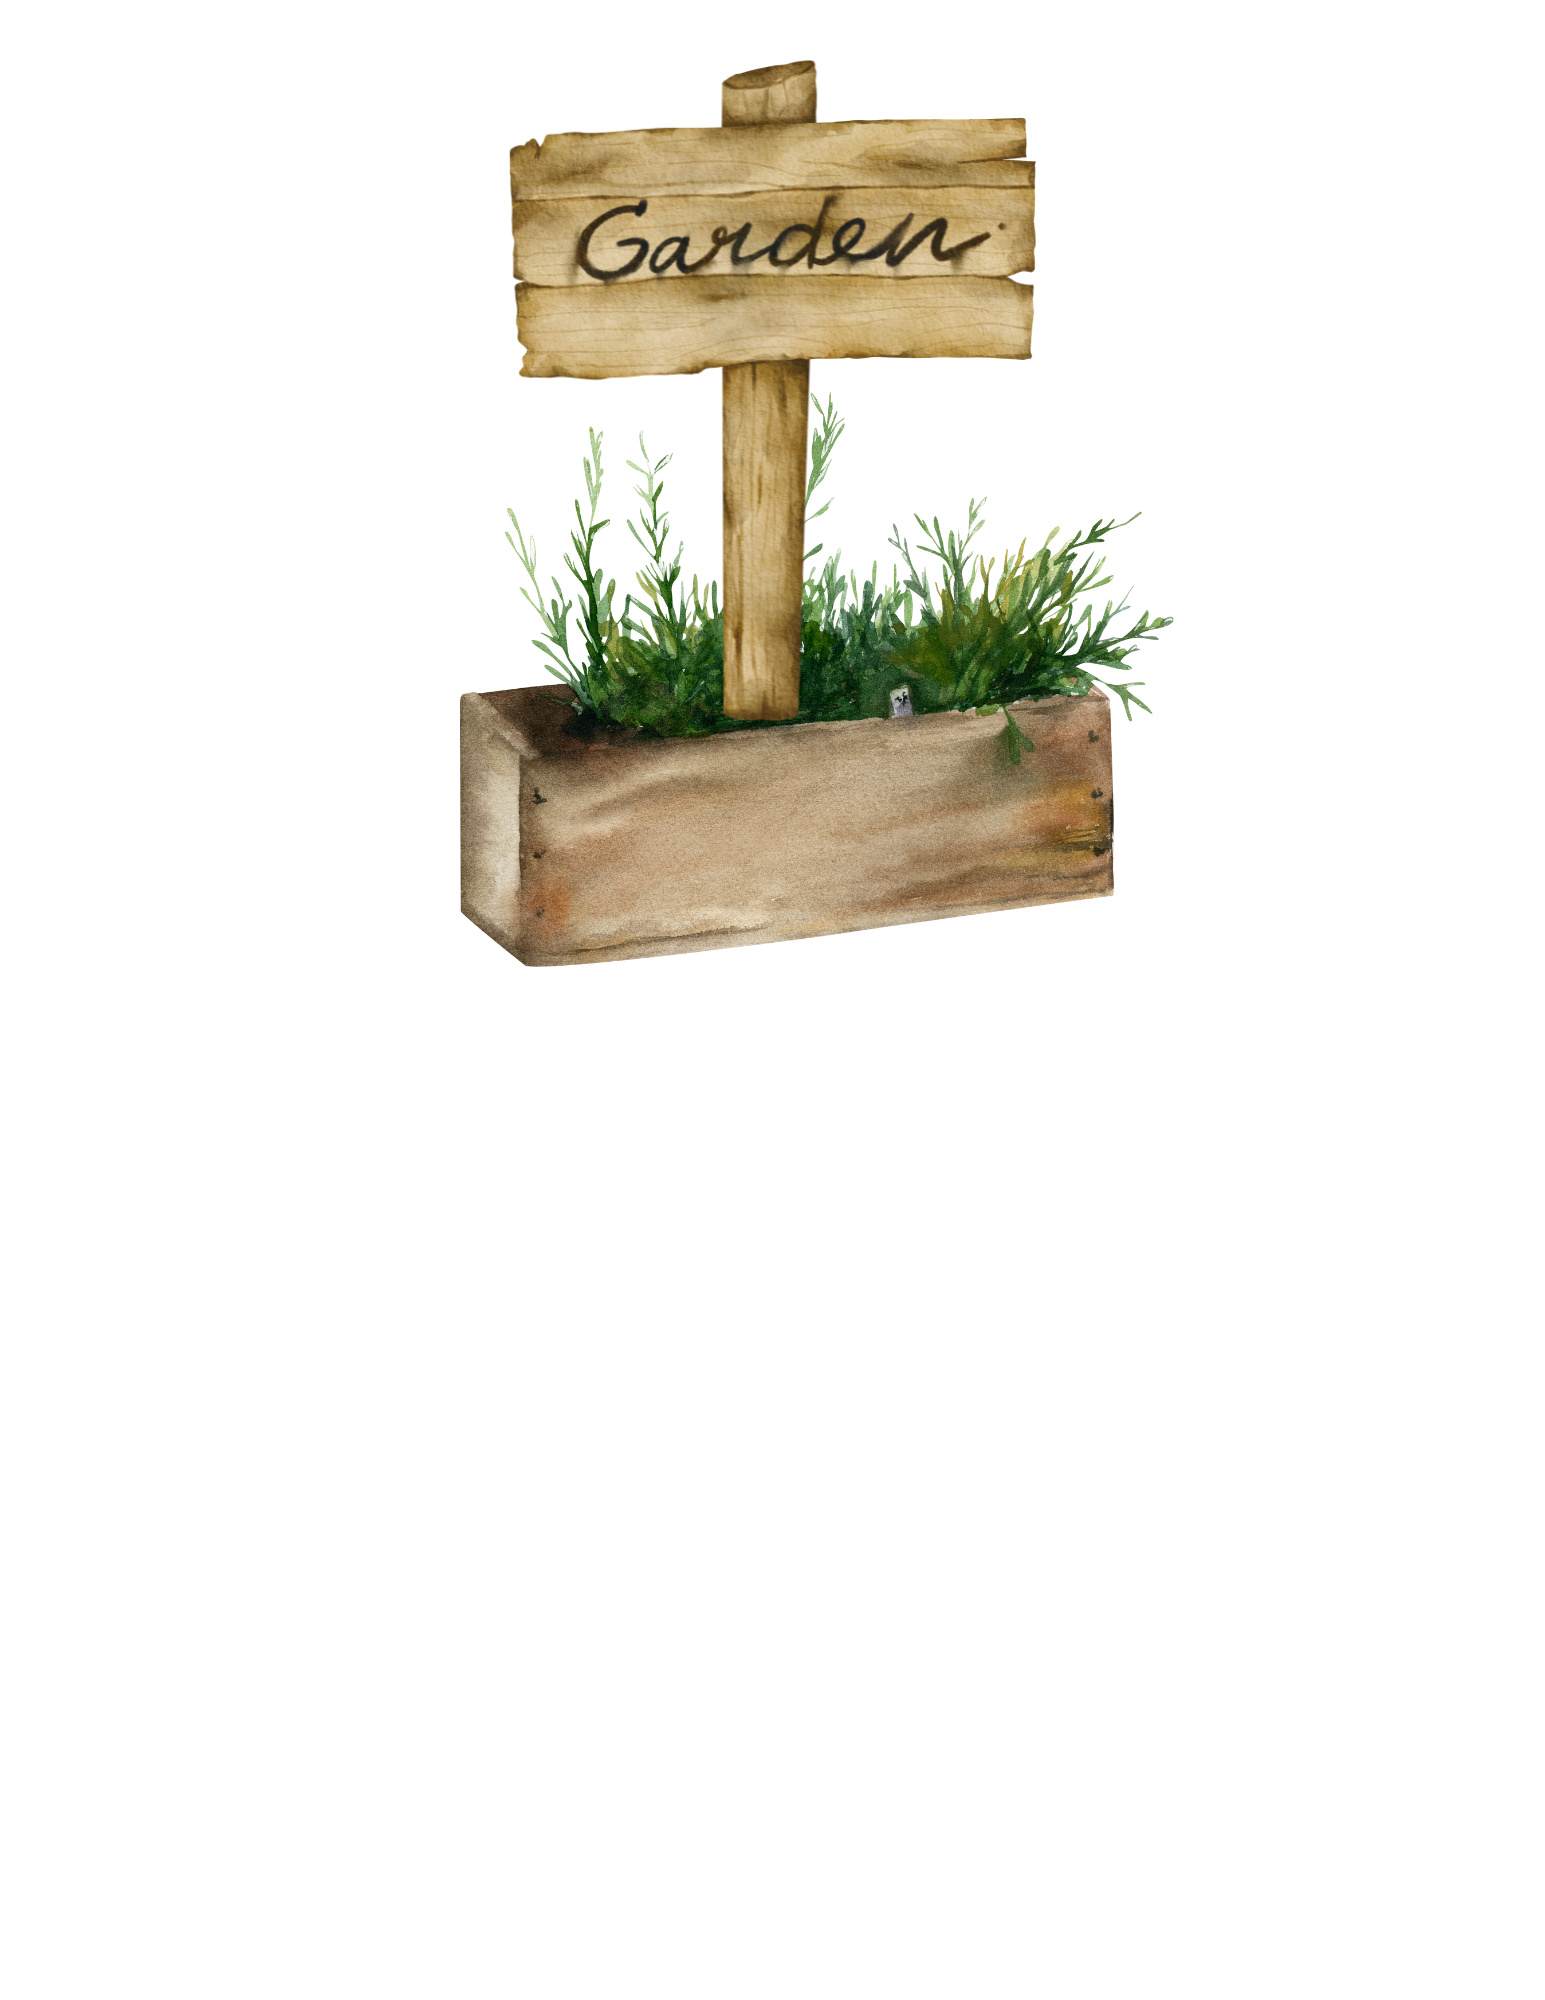 garden sign and box.png